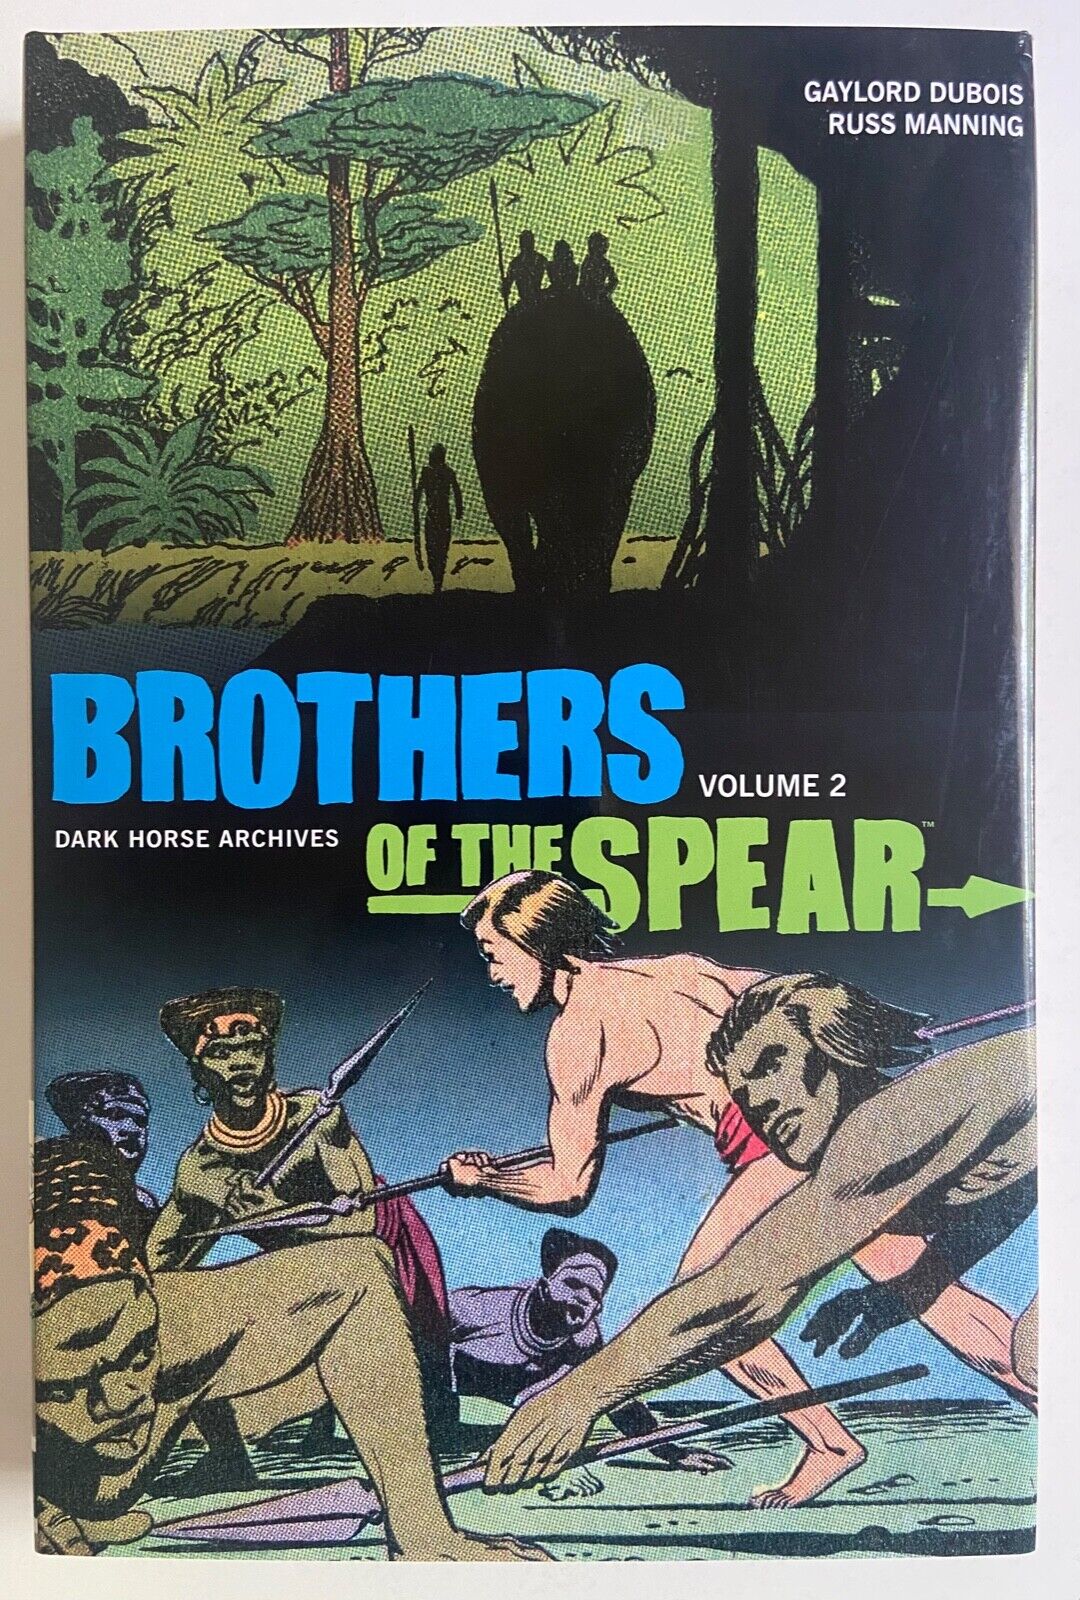 BROTHERS OF THE SPEAR ARCHIVES HC Vol 2 Dubois Manning Dark Horse 2013 NM 1st pr